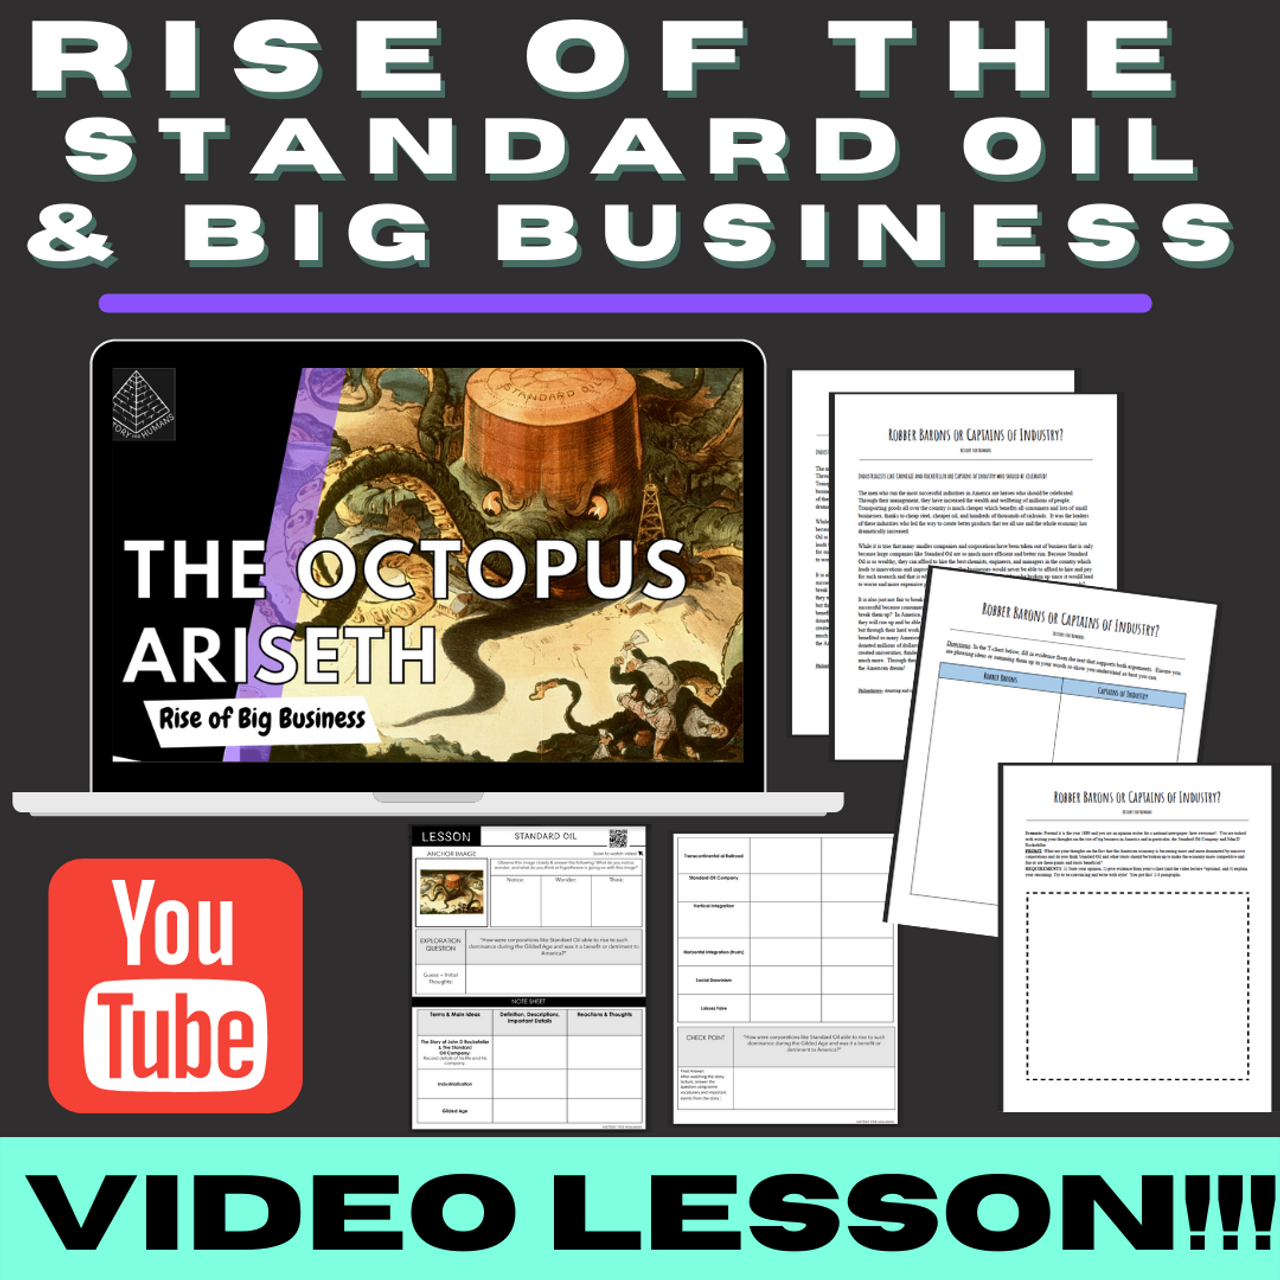 Video lesson of the story of John D Rockefeller and the rise of Standard Oil trust that also tells the larger story of the rise of big business in America and how it impacted the economy.